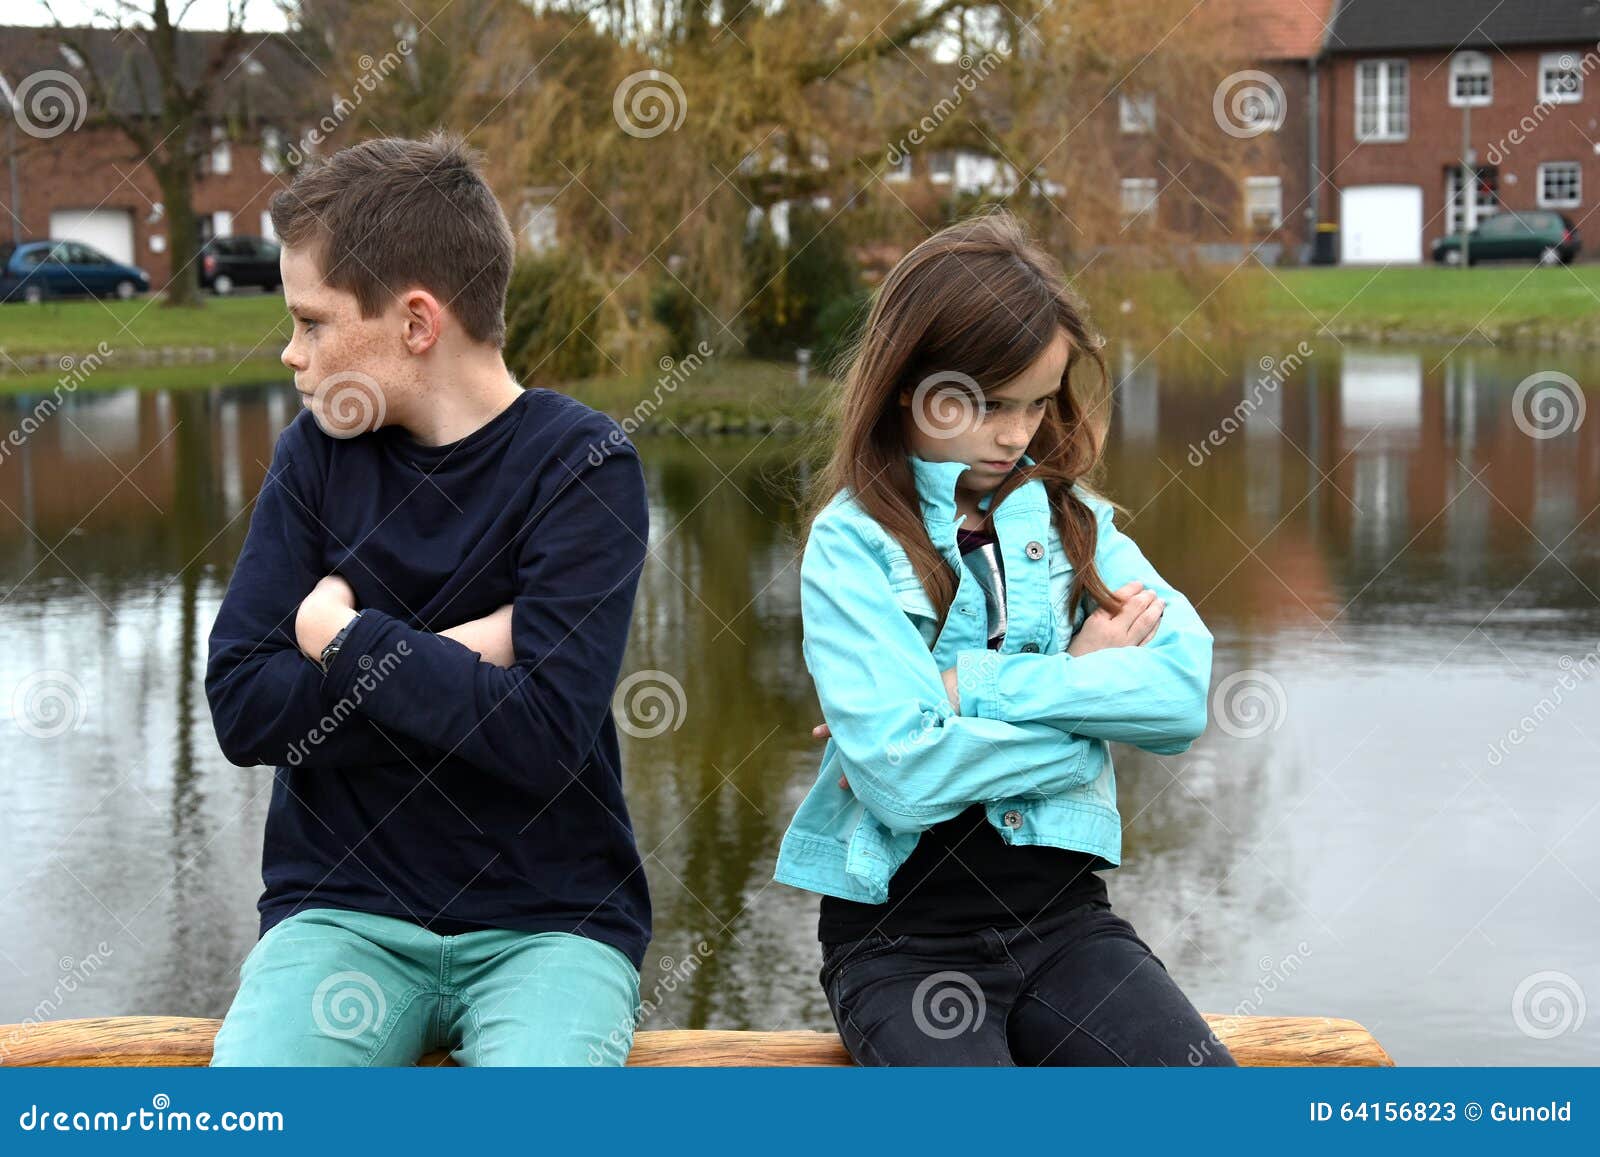 Stubborn siblings stock image. Image of angry, discord